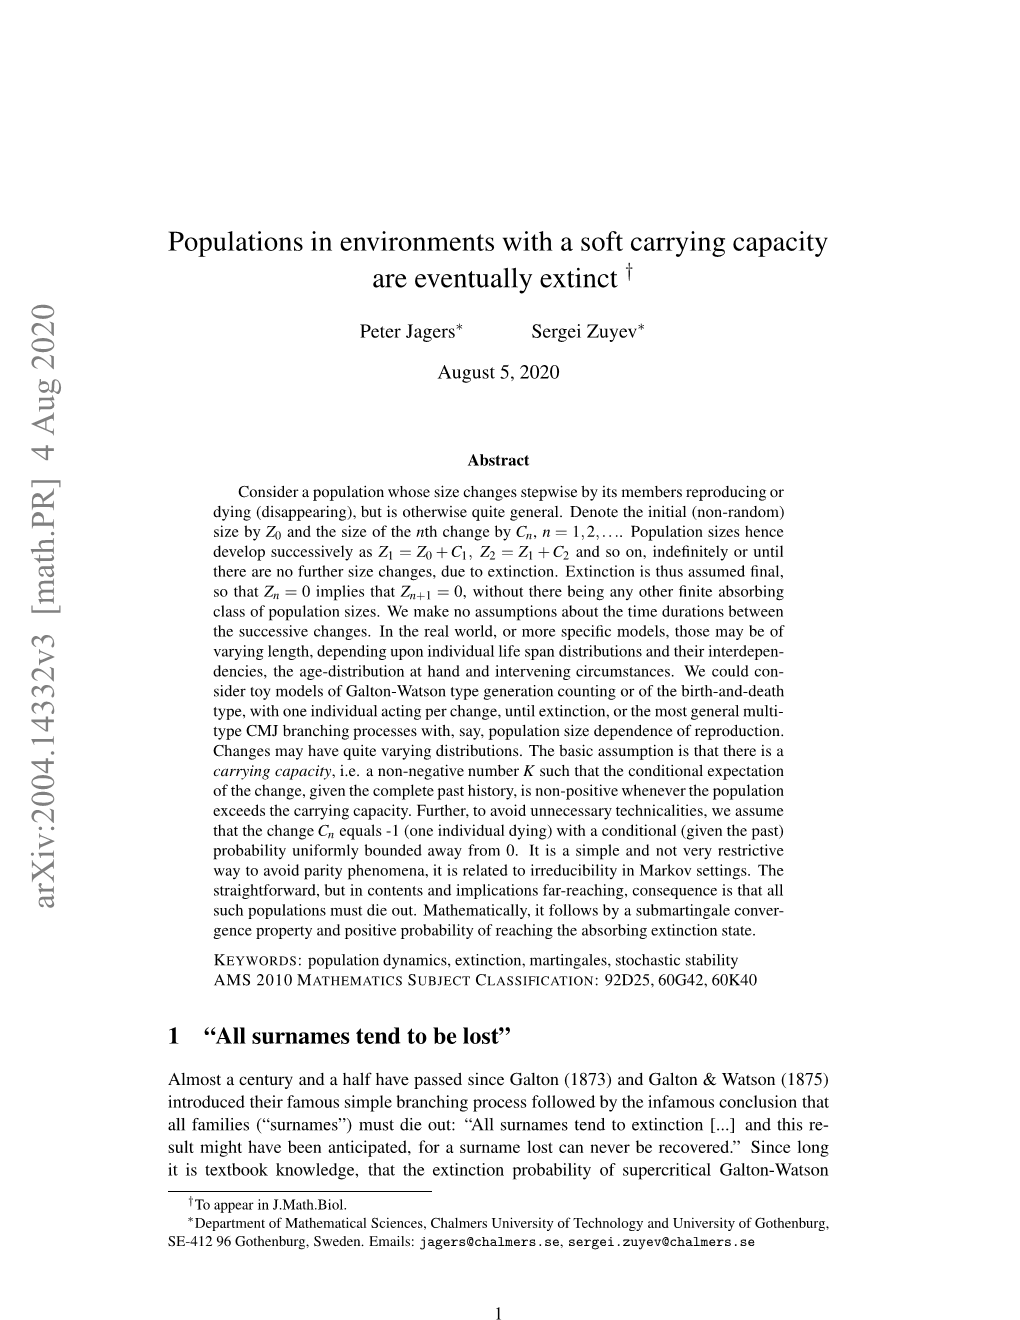 Populations in Environments with a Soft Carrying Capacity Are Eventually